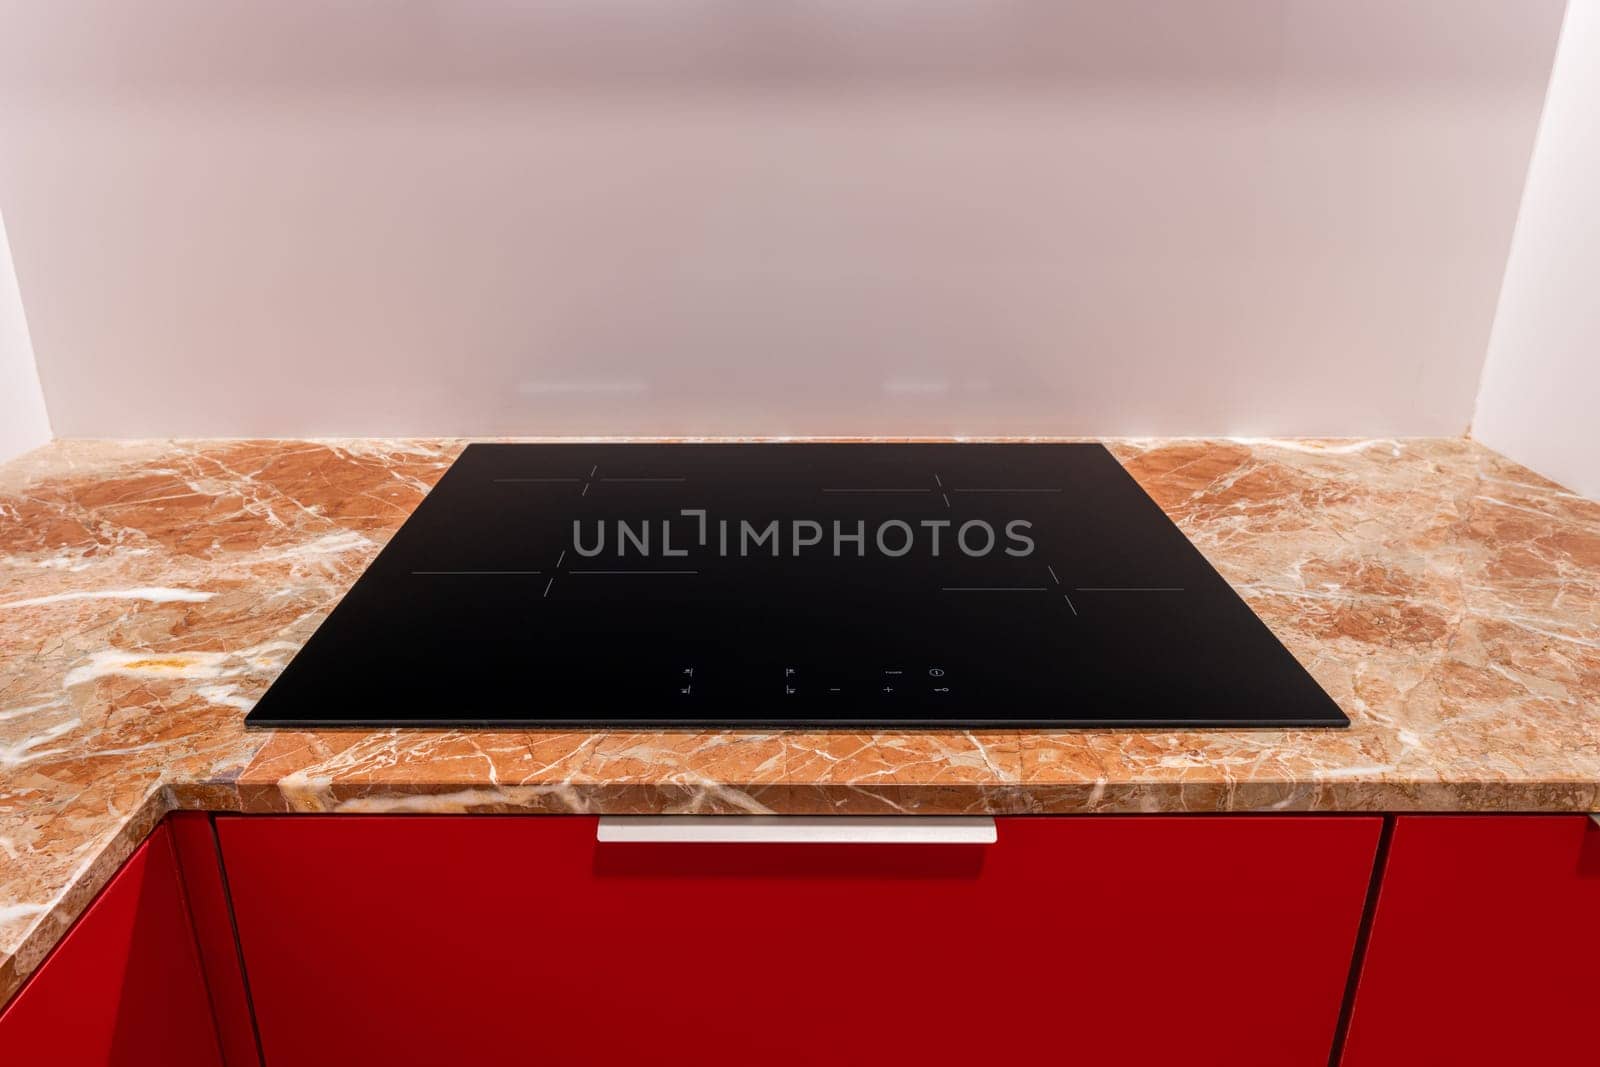 Modern induction cooktop on a marble countertop with red cabinets by apavlin